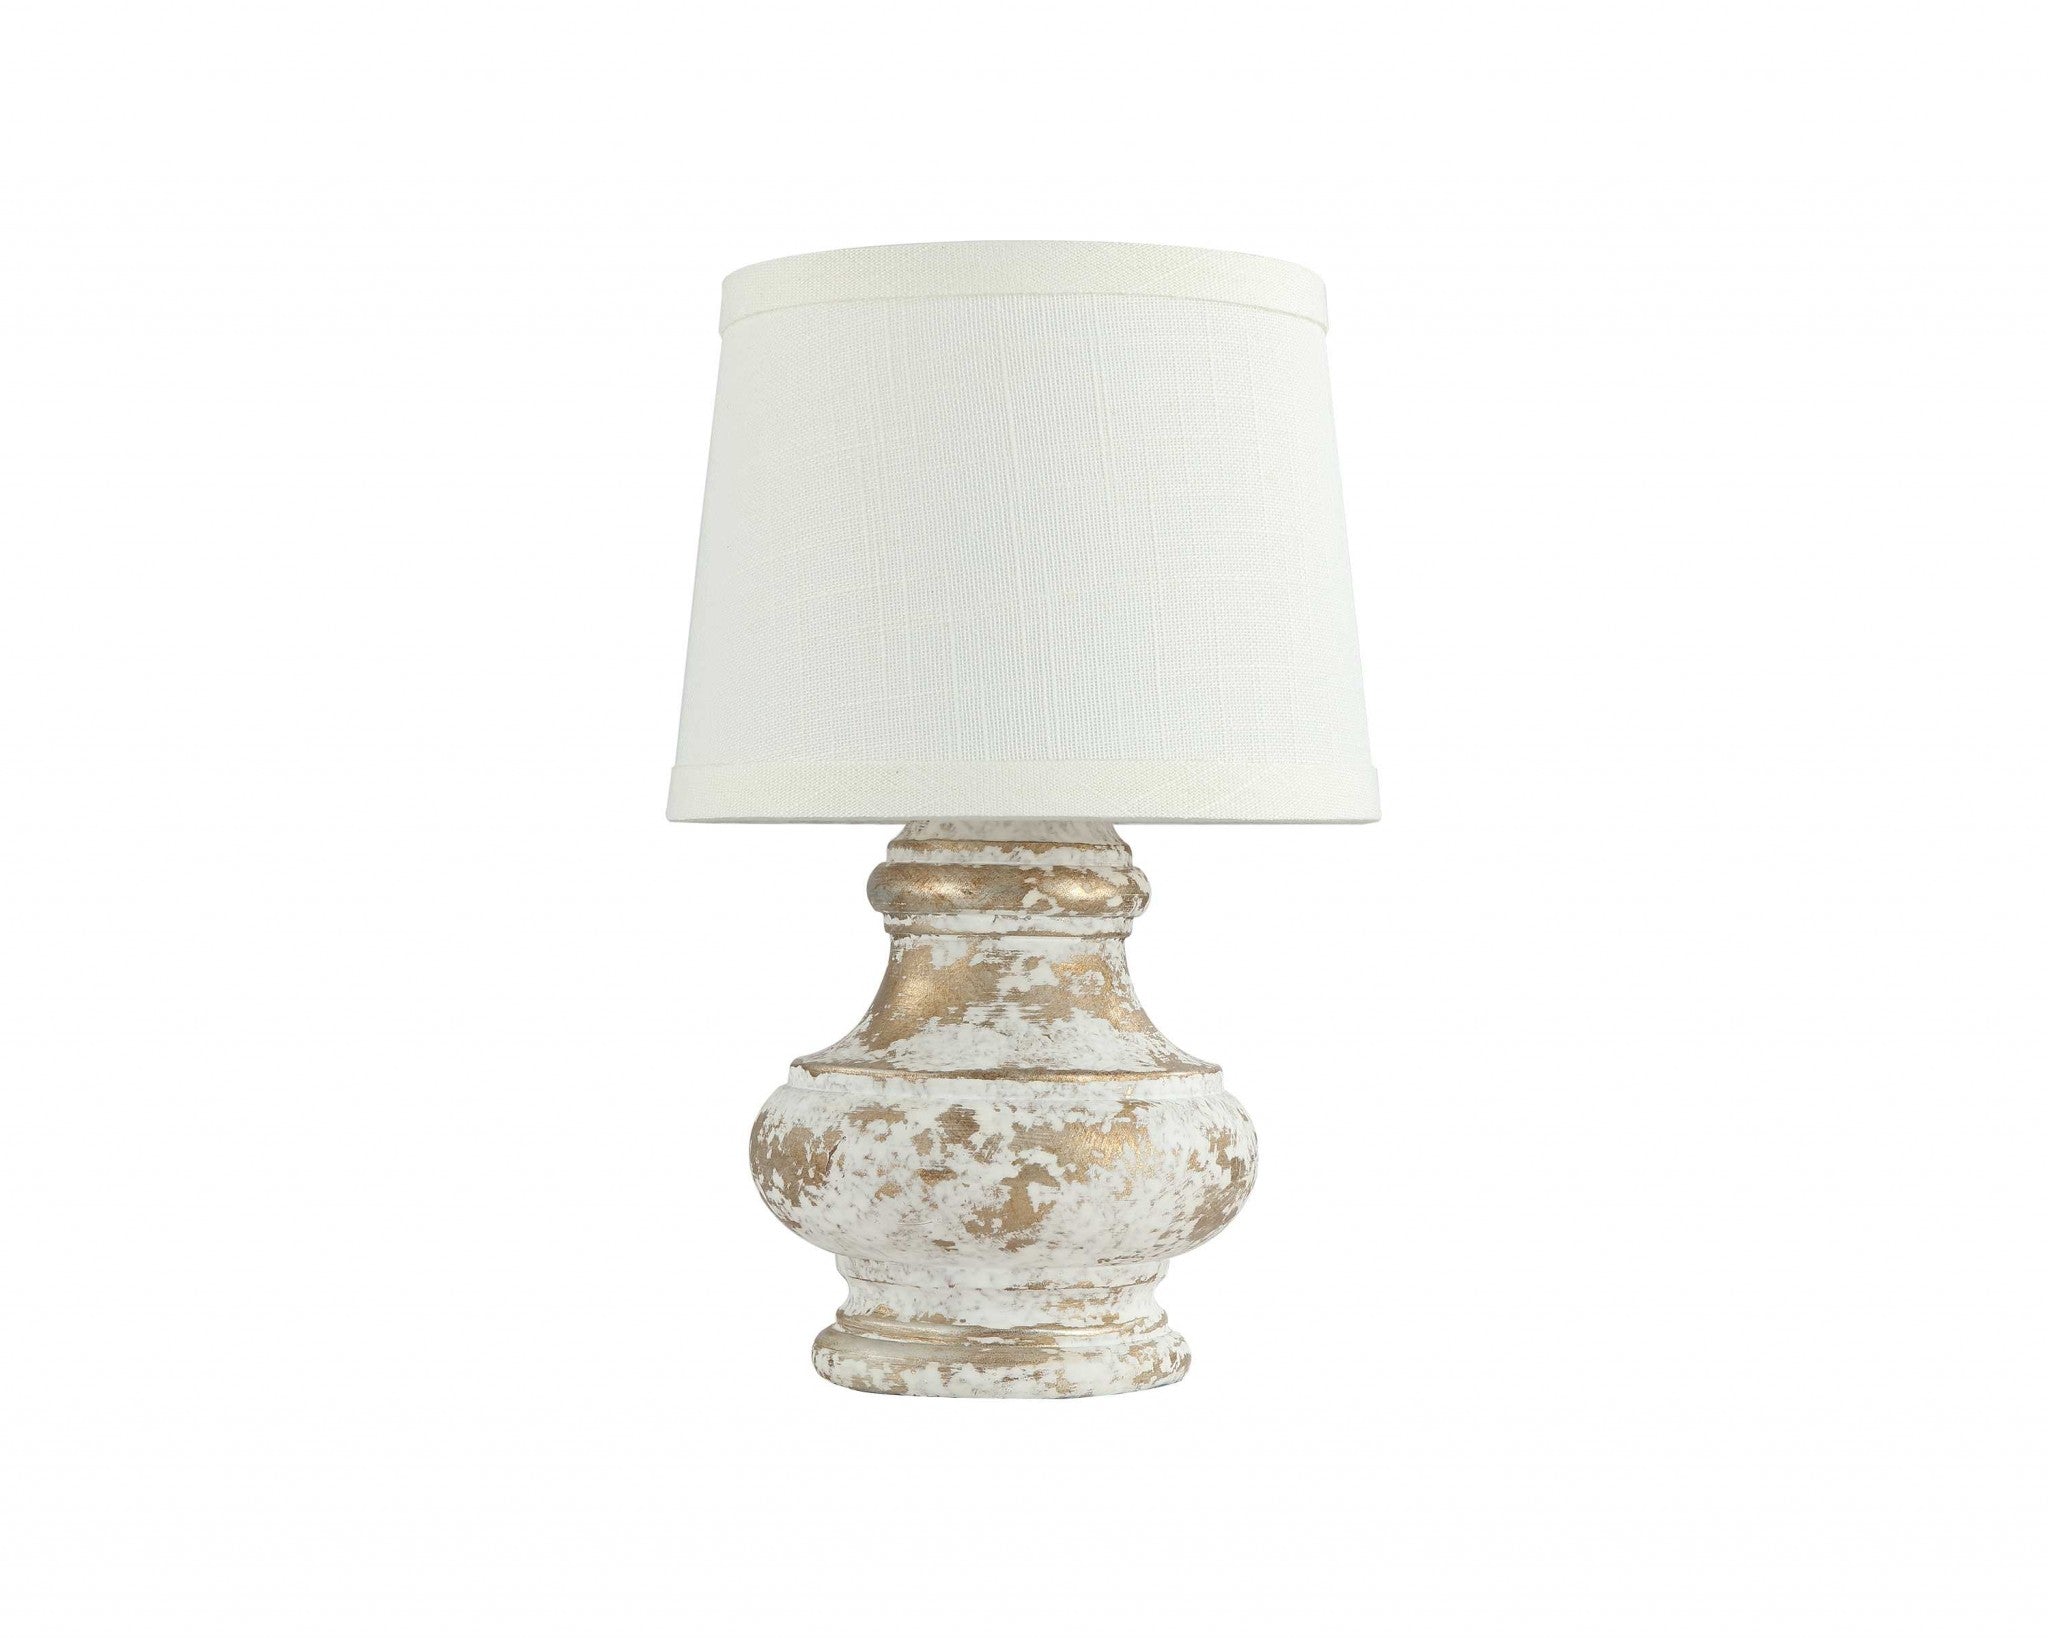 12" Gold and White Table Lamp With White Empire Shade